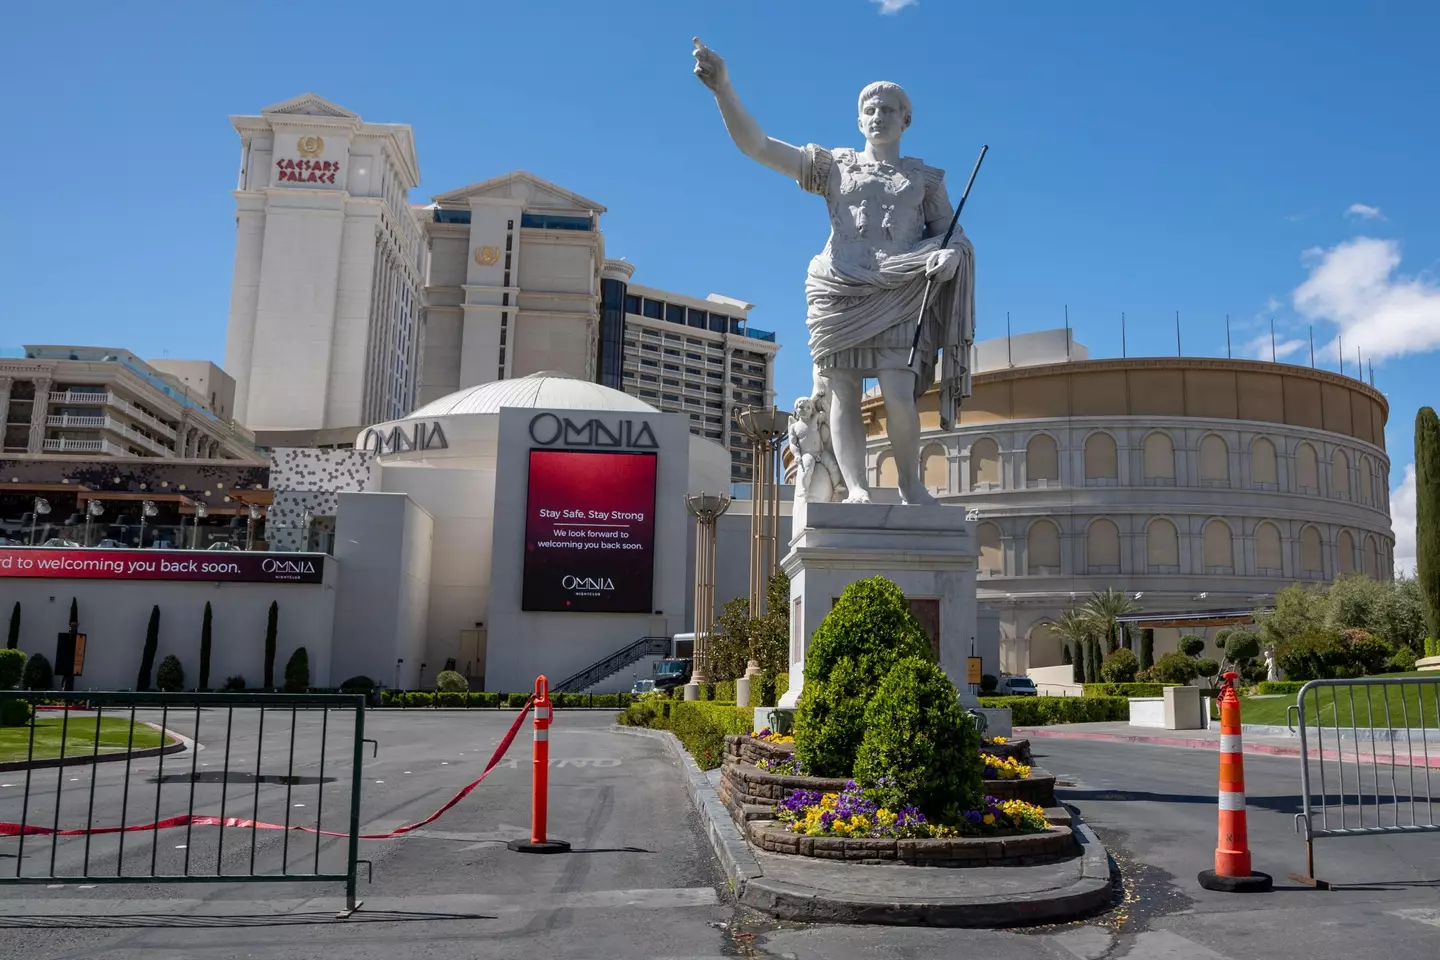 Weekends with Adele will take place at the Colosseum at Caesars Palace.